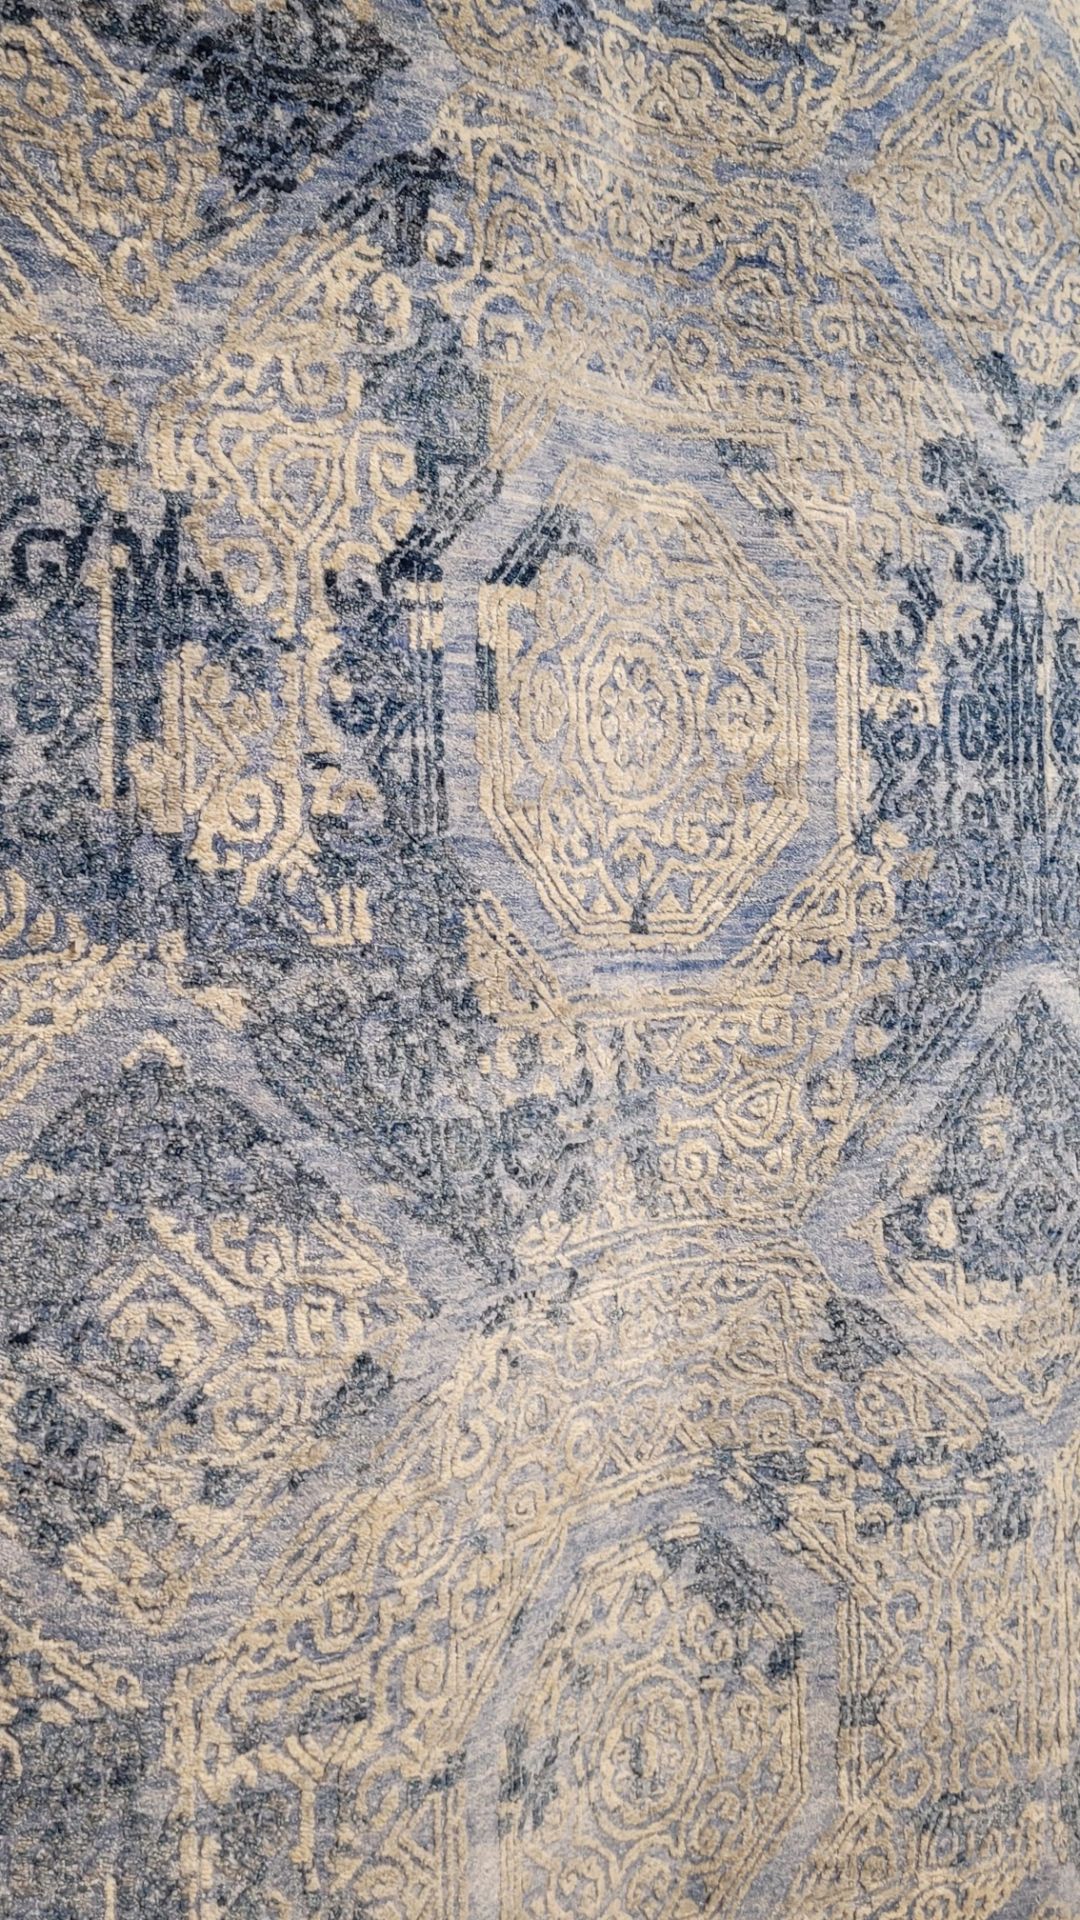 APPROX 8' x 10' - BLUE/SILVER - ART. SILK HAND KNOTTED IN INDIA - MSRP $5,997.00 (LOCATED IN GALLERY - Image 4 of 6